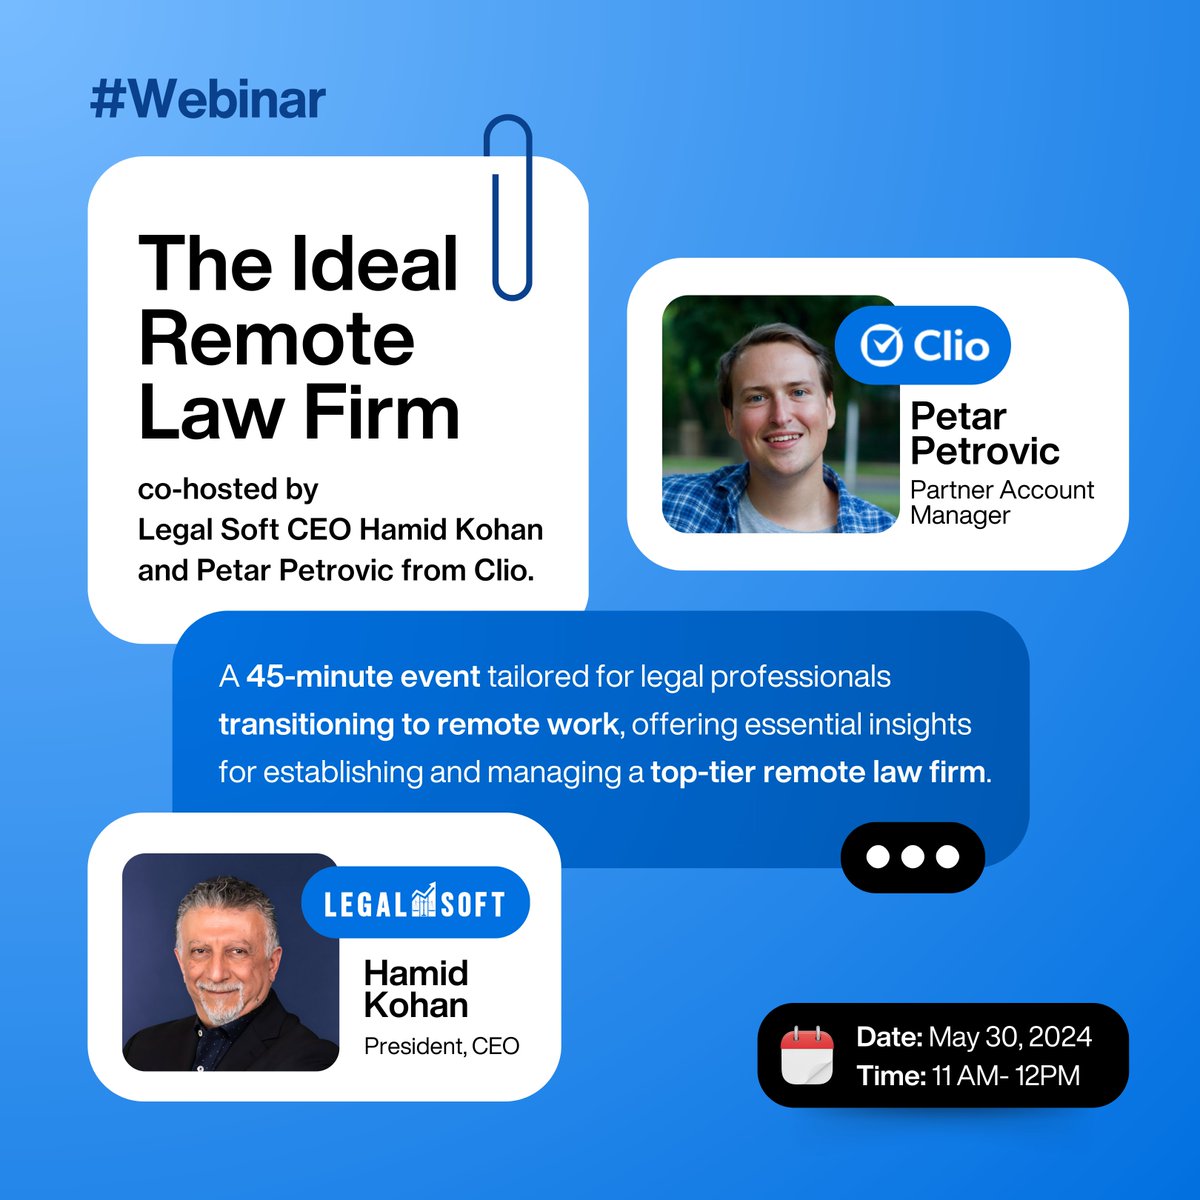 Join us on May 30th from 11 AM to 12 PM for 'The Ideal Remote Law Firm,' an exclusive 45-minute webinar.

Sign up now!

legalsoft.zoom.us/webinar/regist…

#LegalSoft #HamidKohan #Webinar #LegalTech #Clio #LawyerLife #LawFirm #Lawyer #VA #LegalSupport #Practice #LawPractice #Attorney